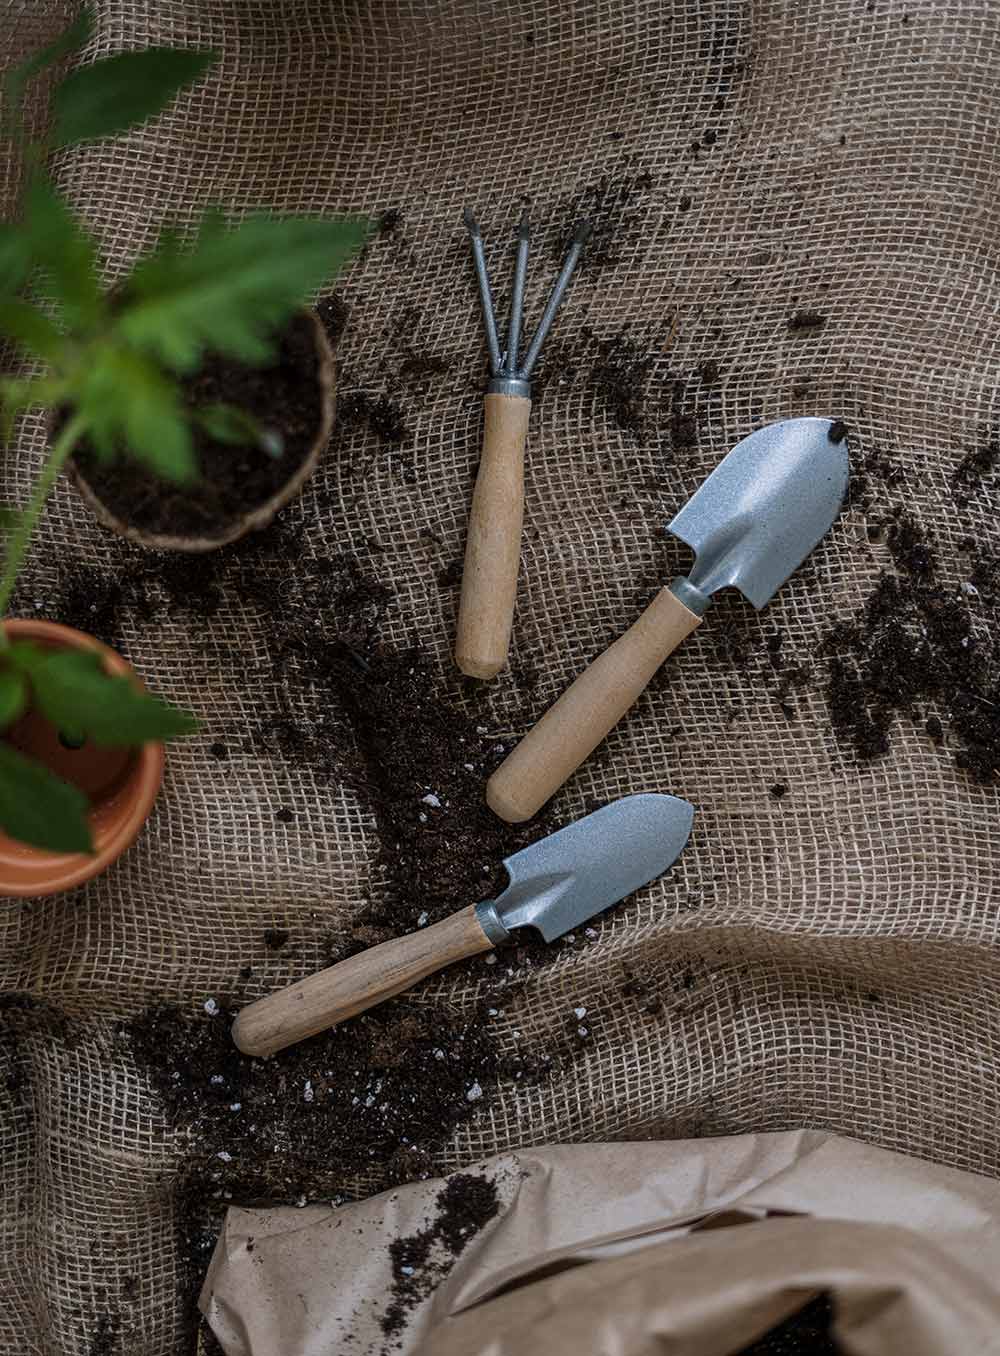 Invest on quality gardening tools - Carousell Philippines